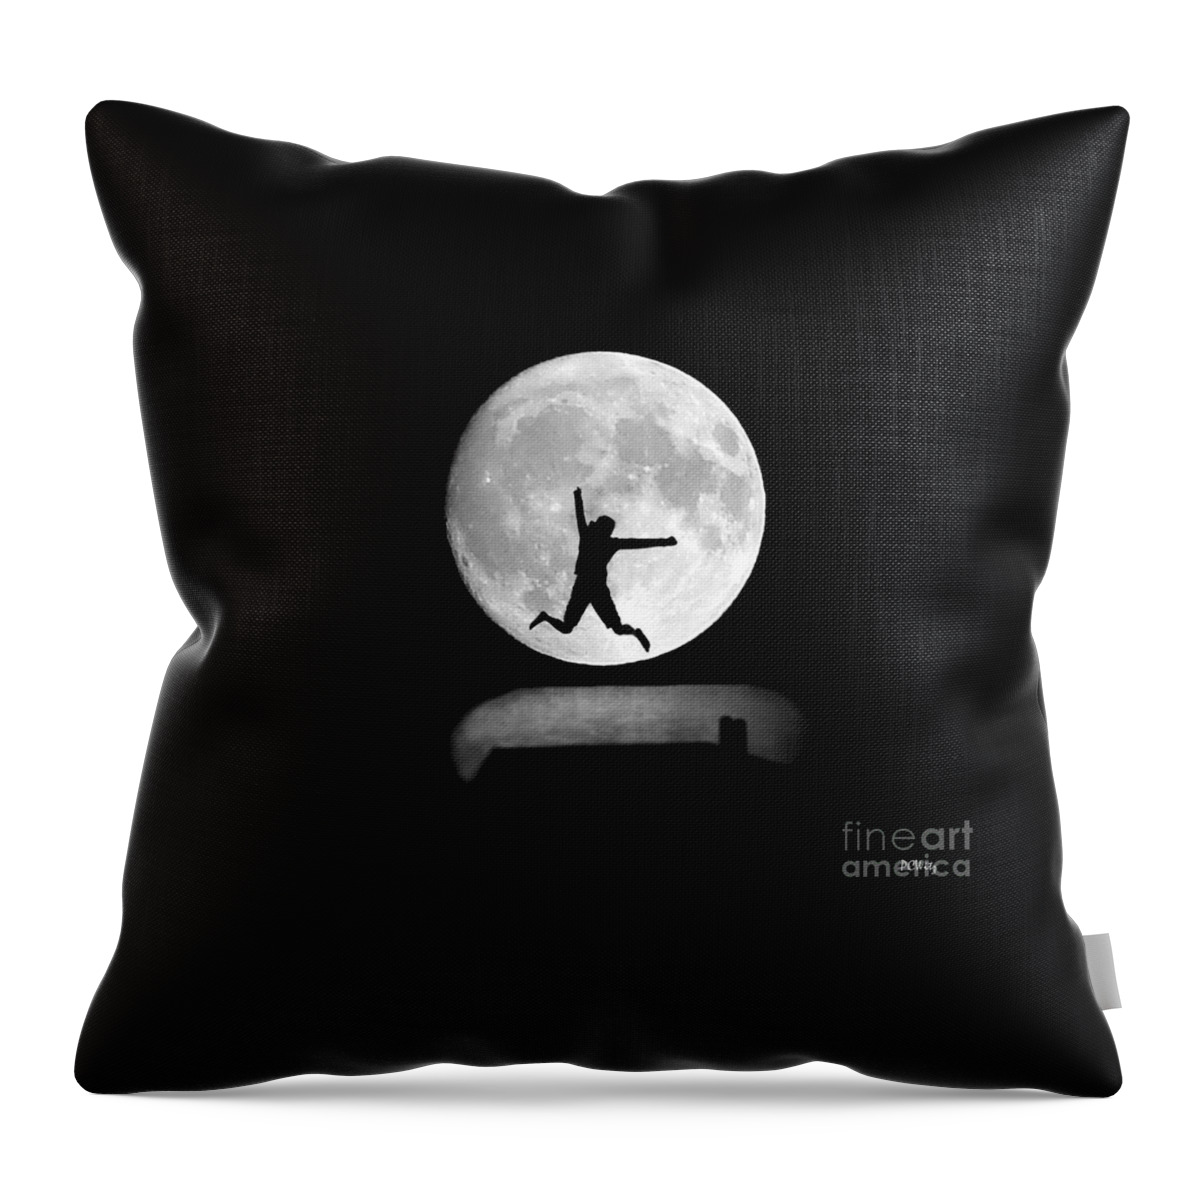 Large Leap For Mankind Throw Pillow featuring the photograph Large Leap For Mankind by Patrick Witz